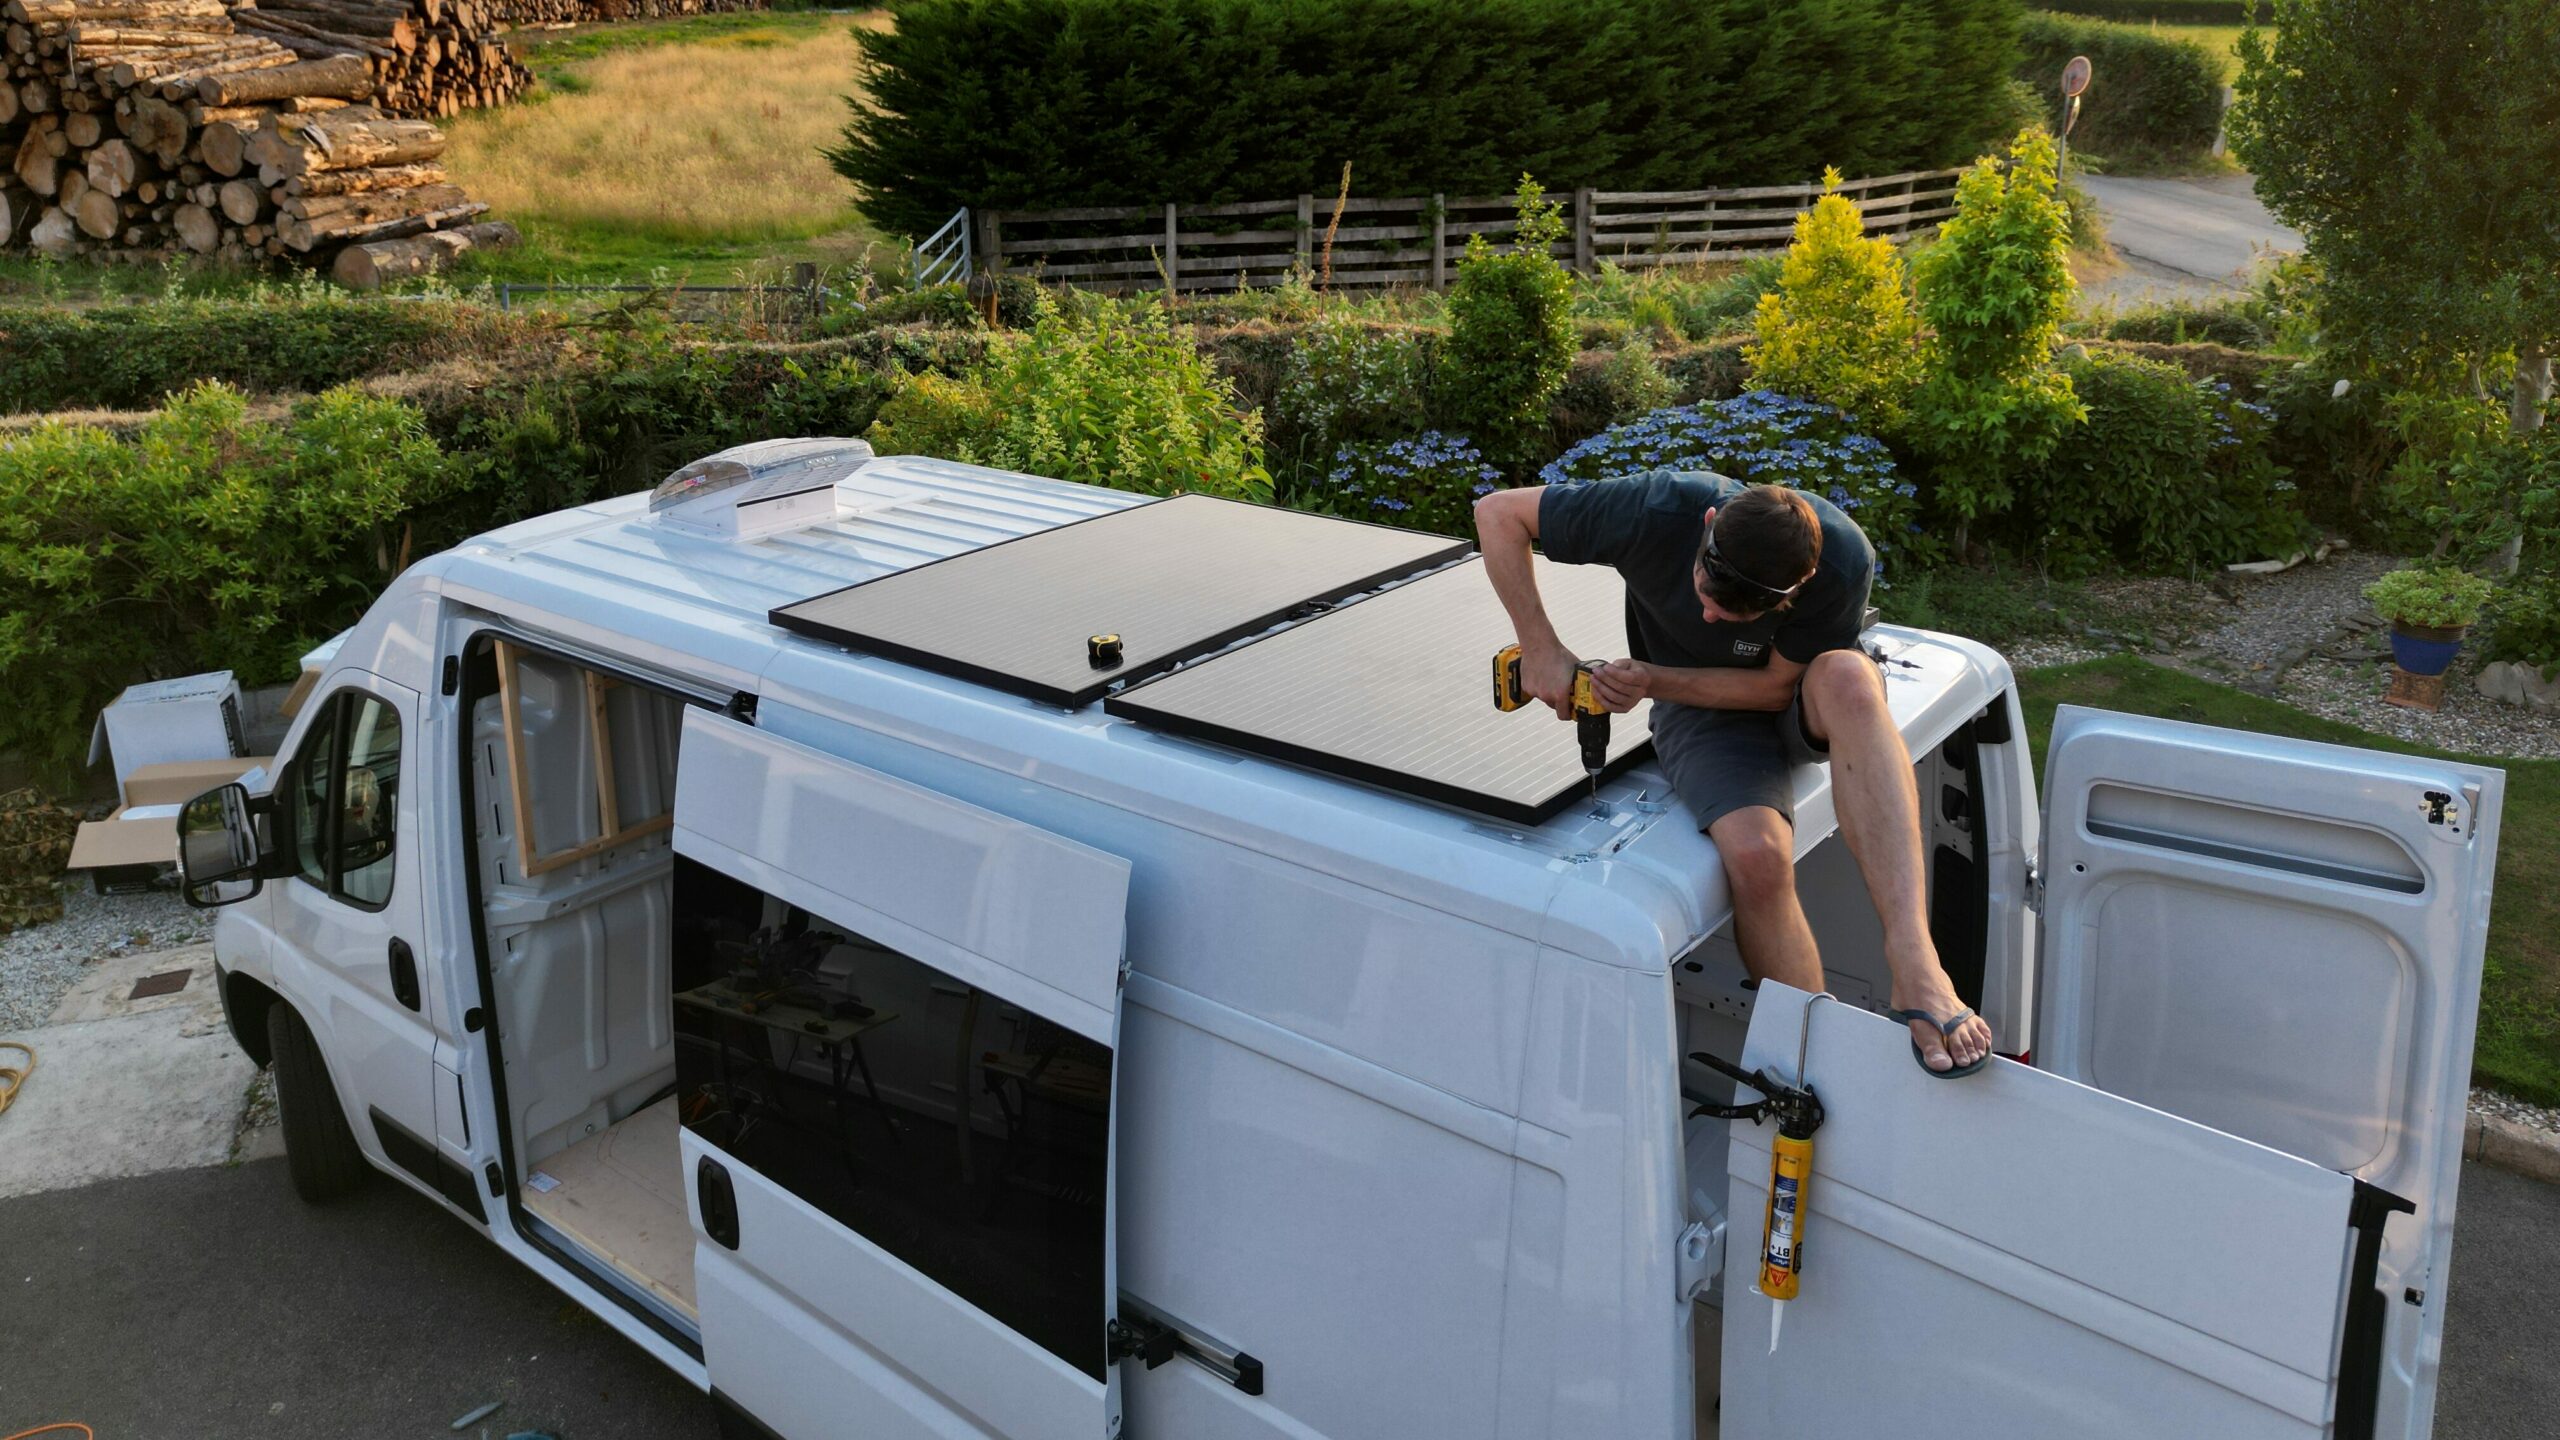 Installing solar panels on the roof of a van conversion.